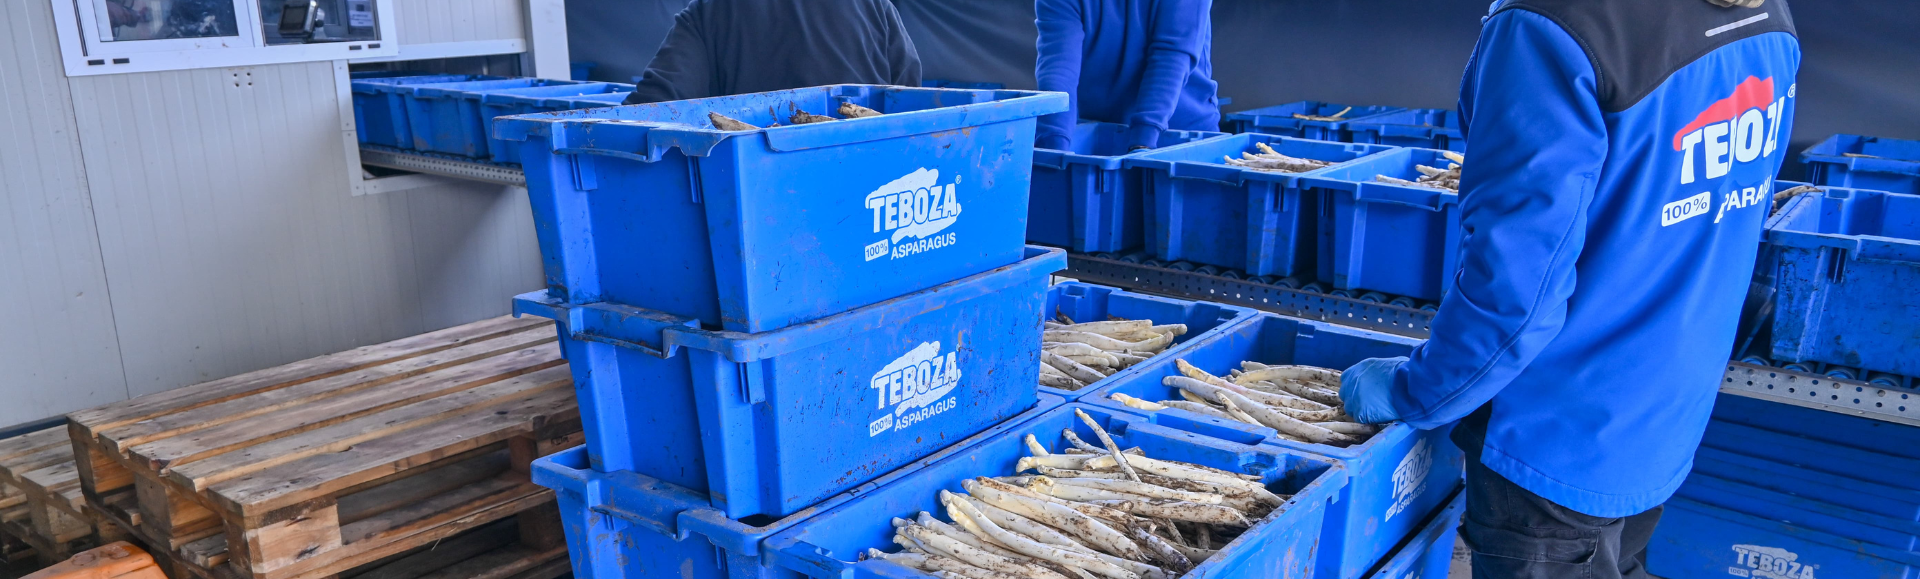 Stack-and-nest containers deployed by Teboza Asparagus